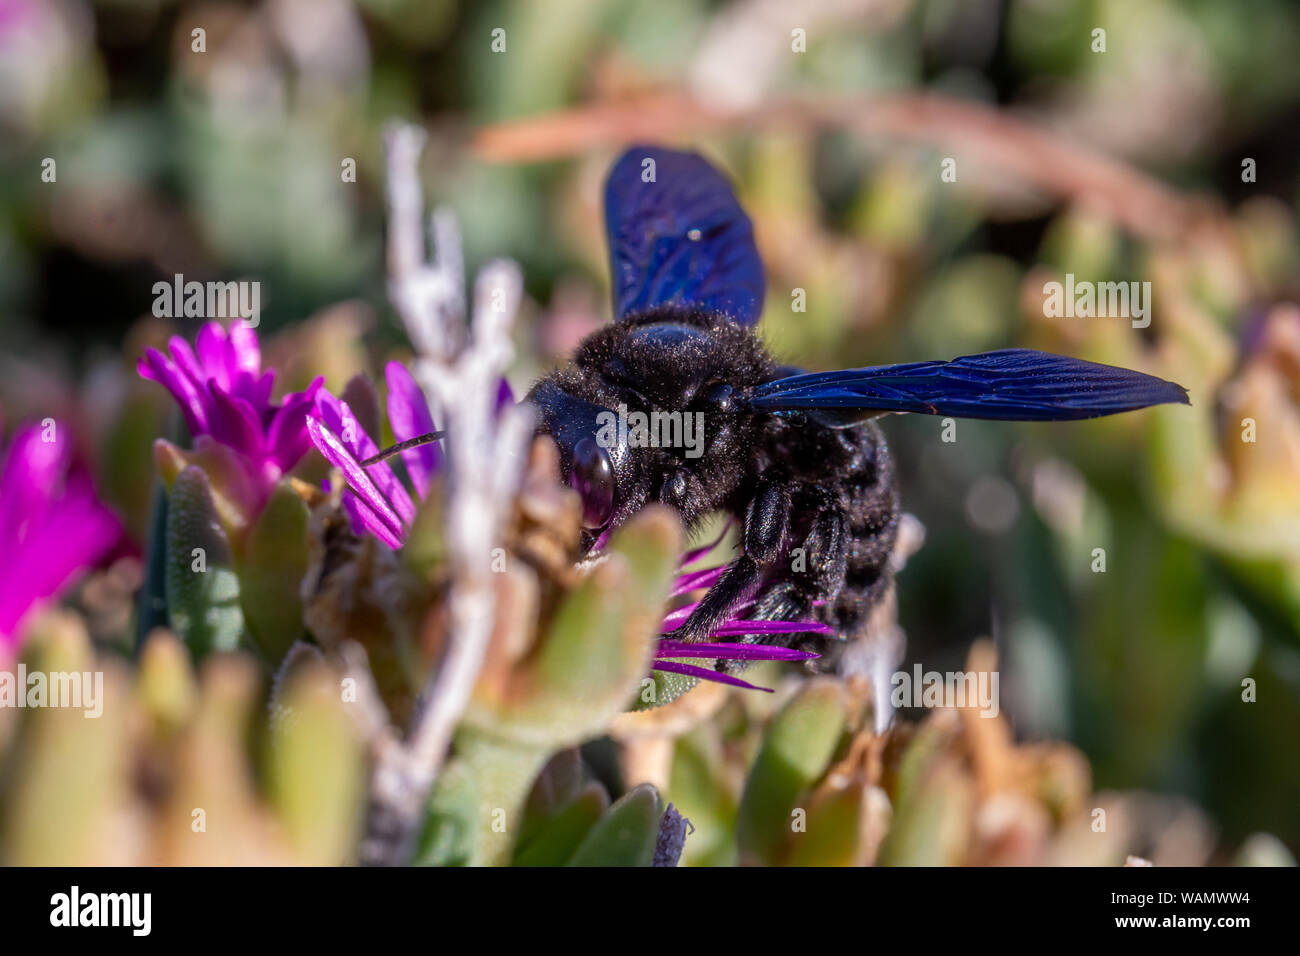 Violet Carpenter bee (Xylocopa violacea) feeding on nectar from the pink flowers of Carpobrotus succulent plants in Tuscany, Italy Stock Photo